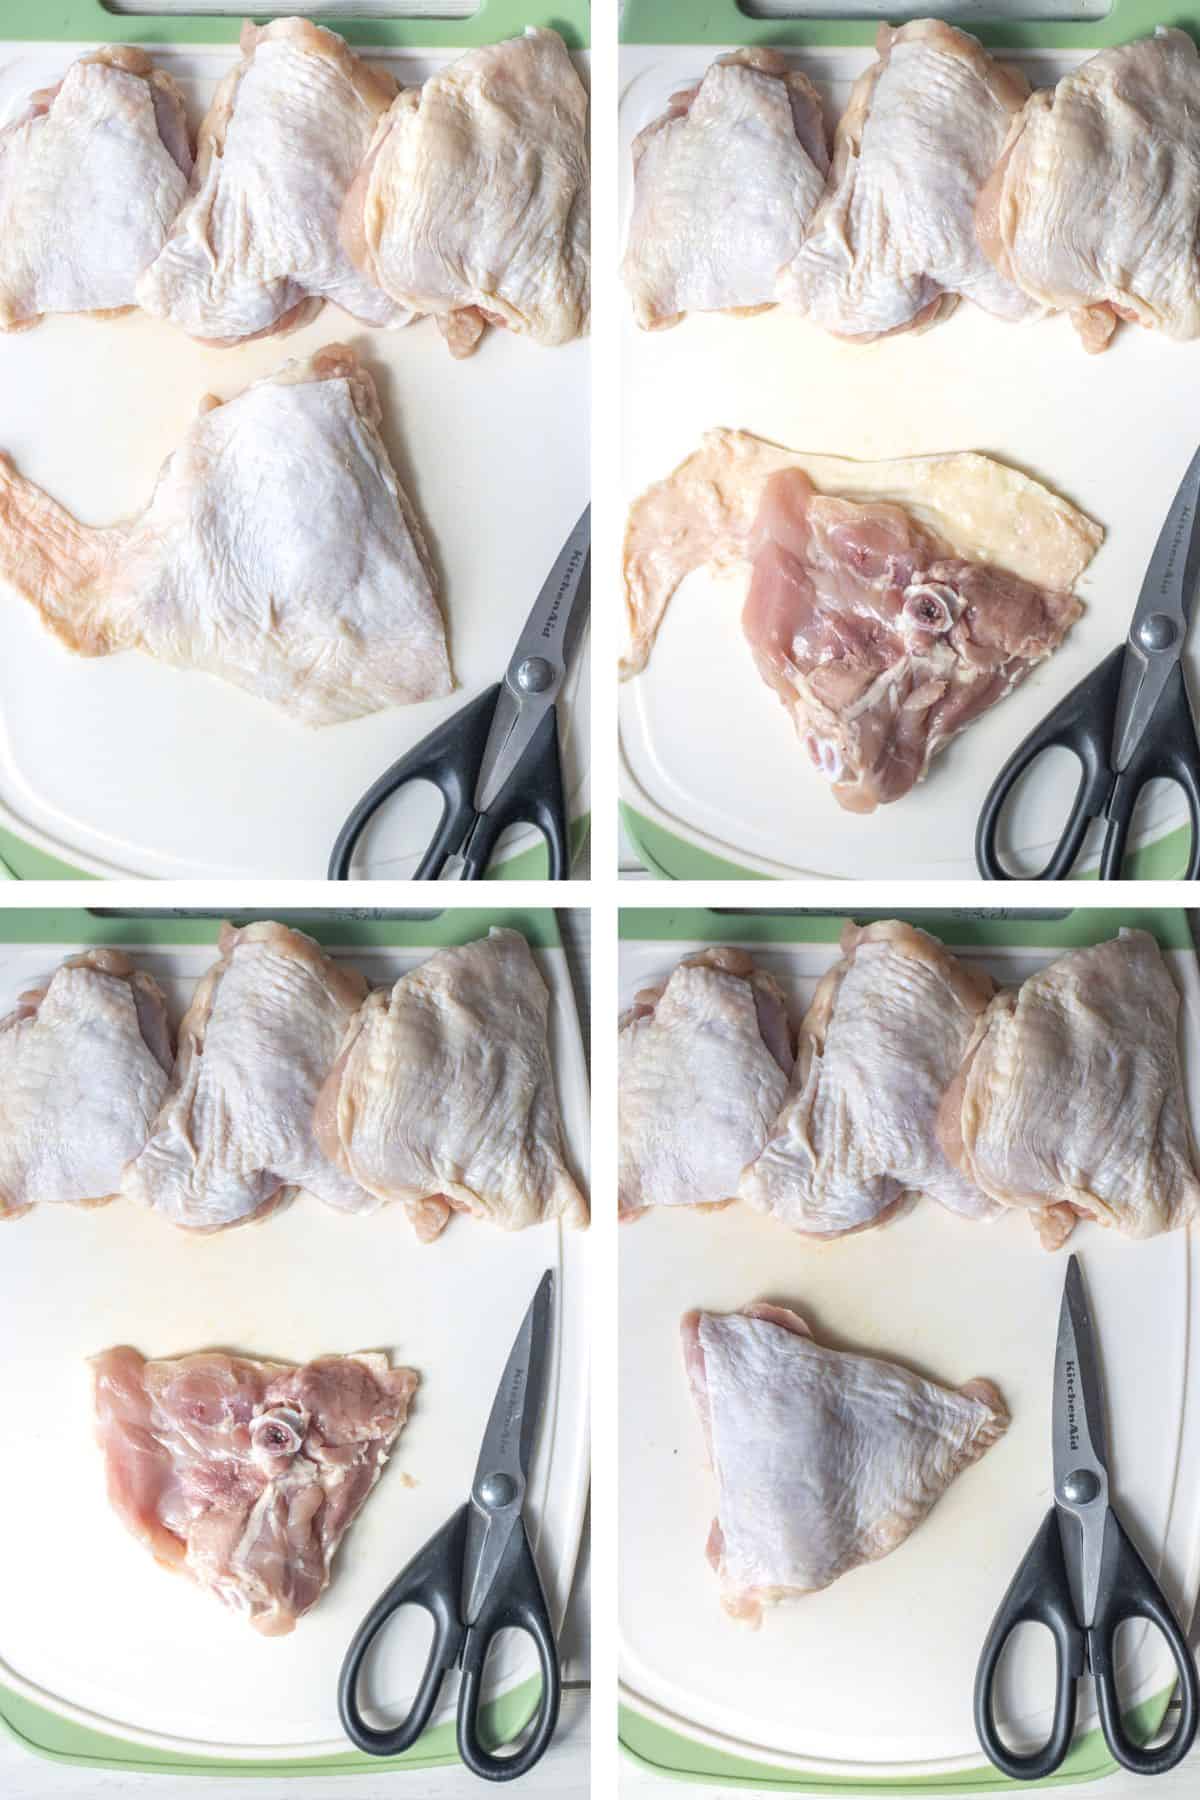 Four part grid showing raw chicken thighs with excess skin and fat being cut away.